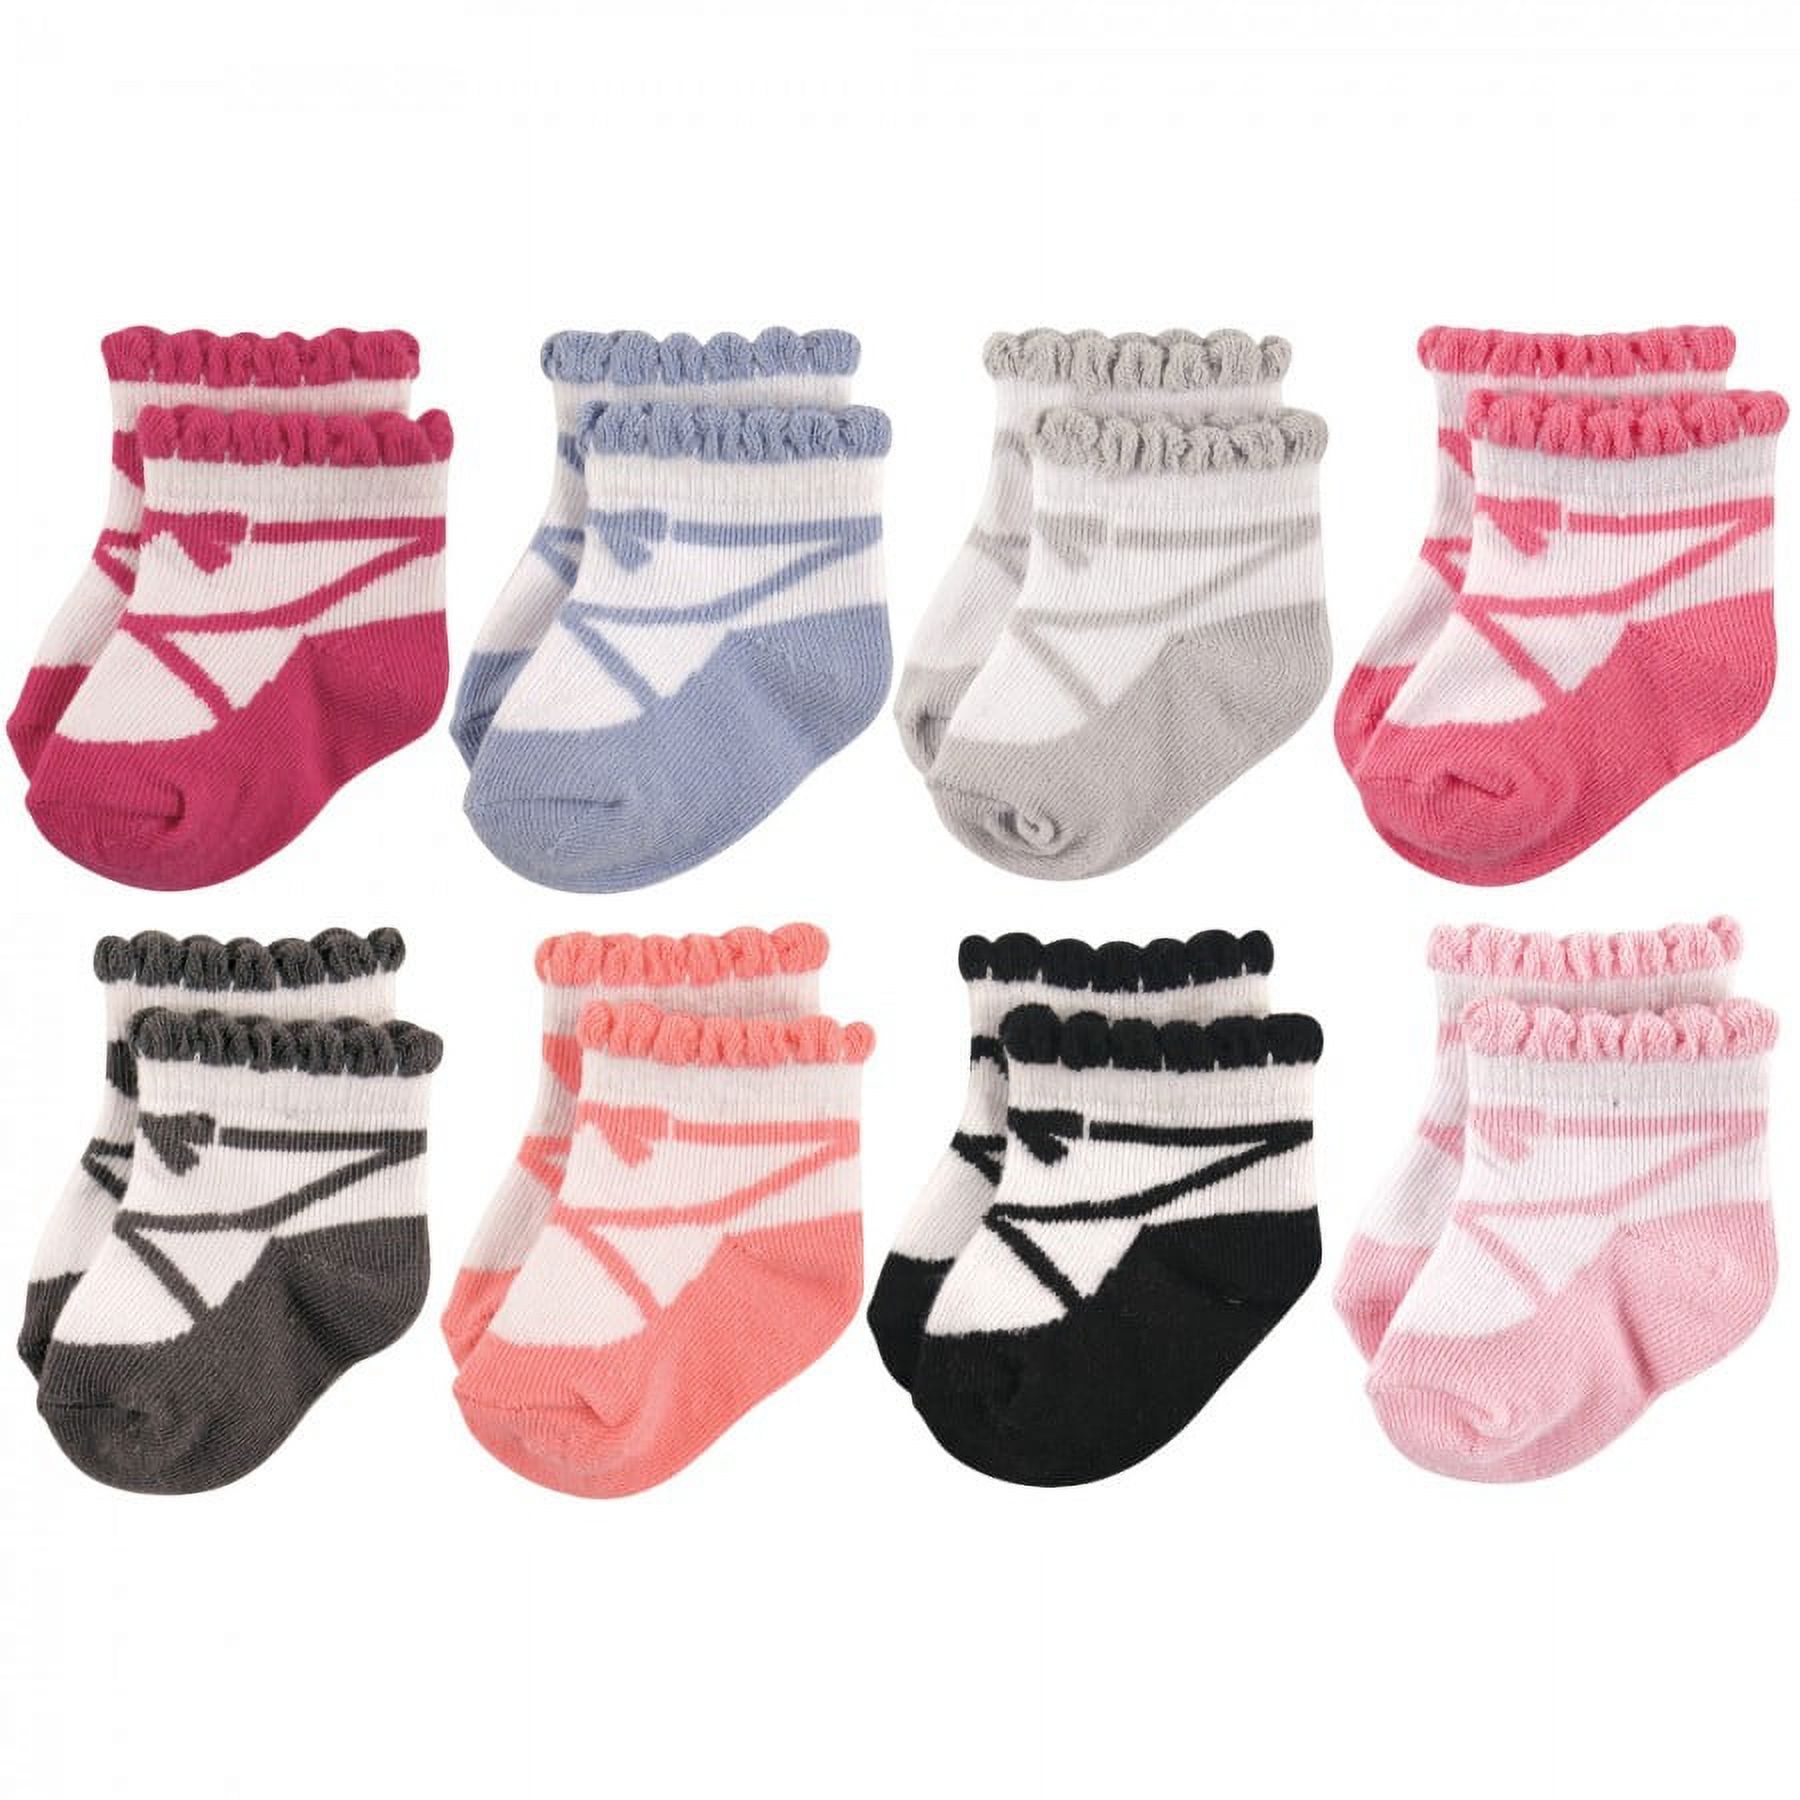 Hudson Baby Infant Girl Cotton Rich Newborn and Terry Socks, Ballet, 12-24 Months - image 1 of 2